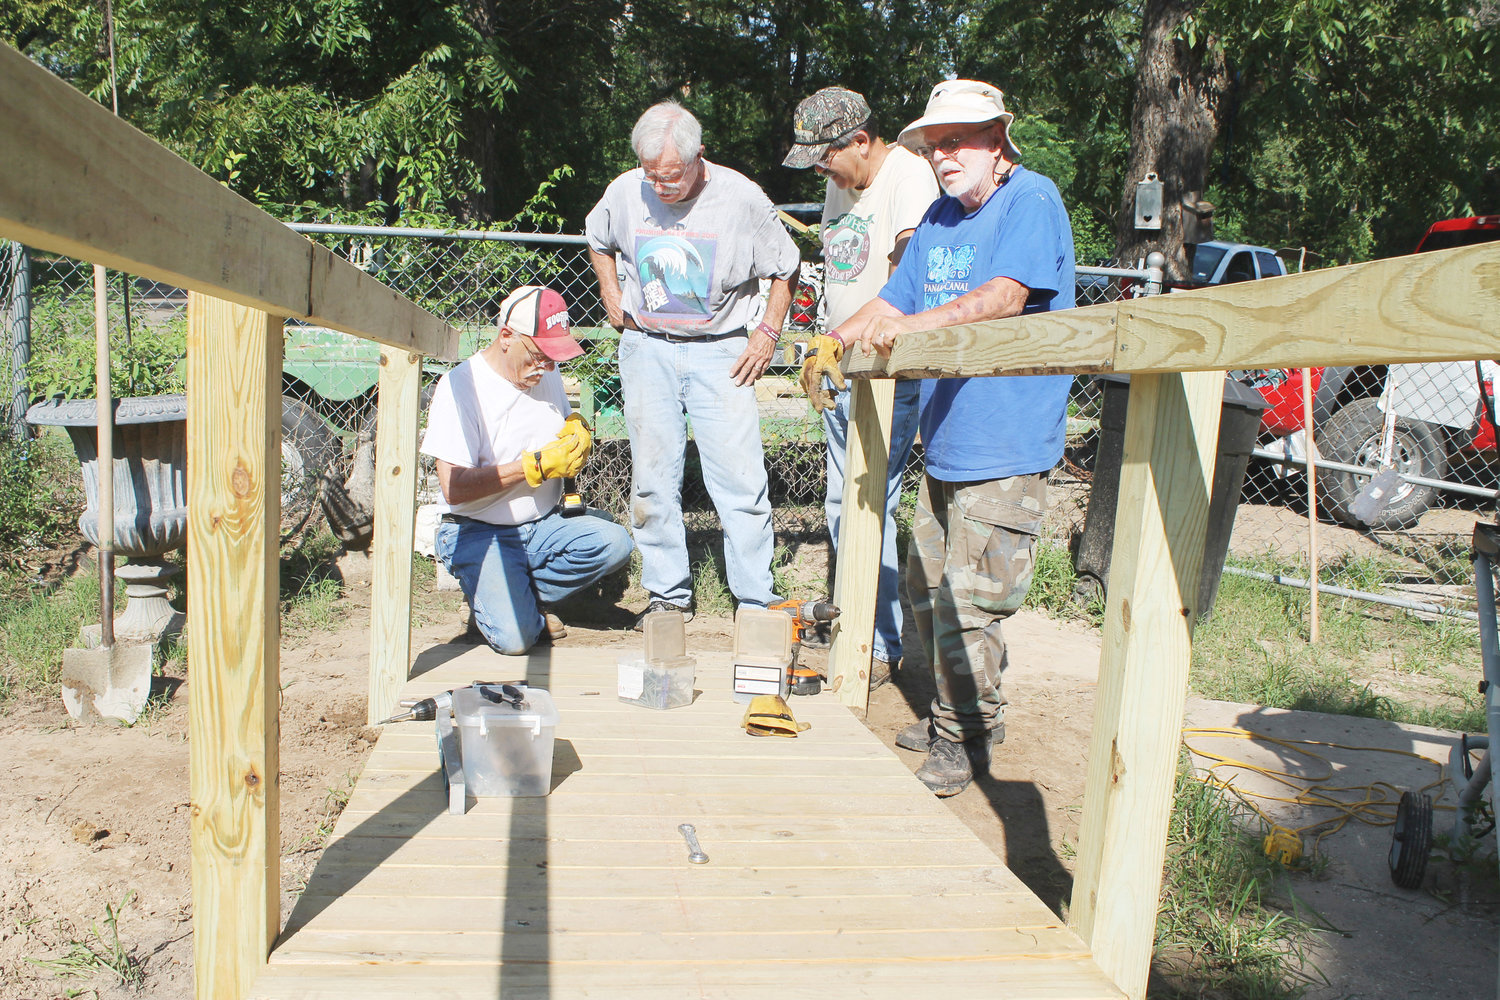 Members of the Methodist Men had already been at work a couple of hours in the mid-morning sun when they were observed building a ramp on a McWhorter Street house Wednesday. The ramp is for an elderly woman who was no longer able to get in and out of her house. Shown are, from left, Charlie Wright, Art Gould, Ed Castro and Roy McGee.